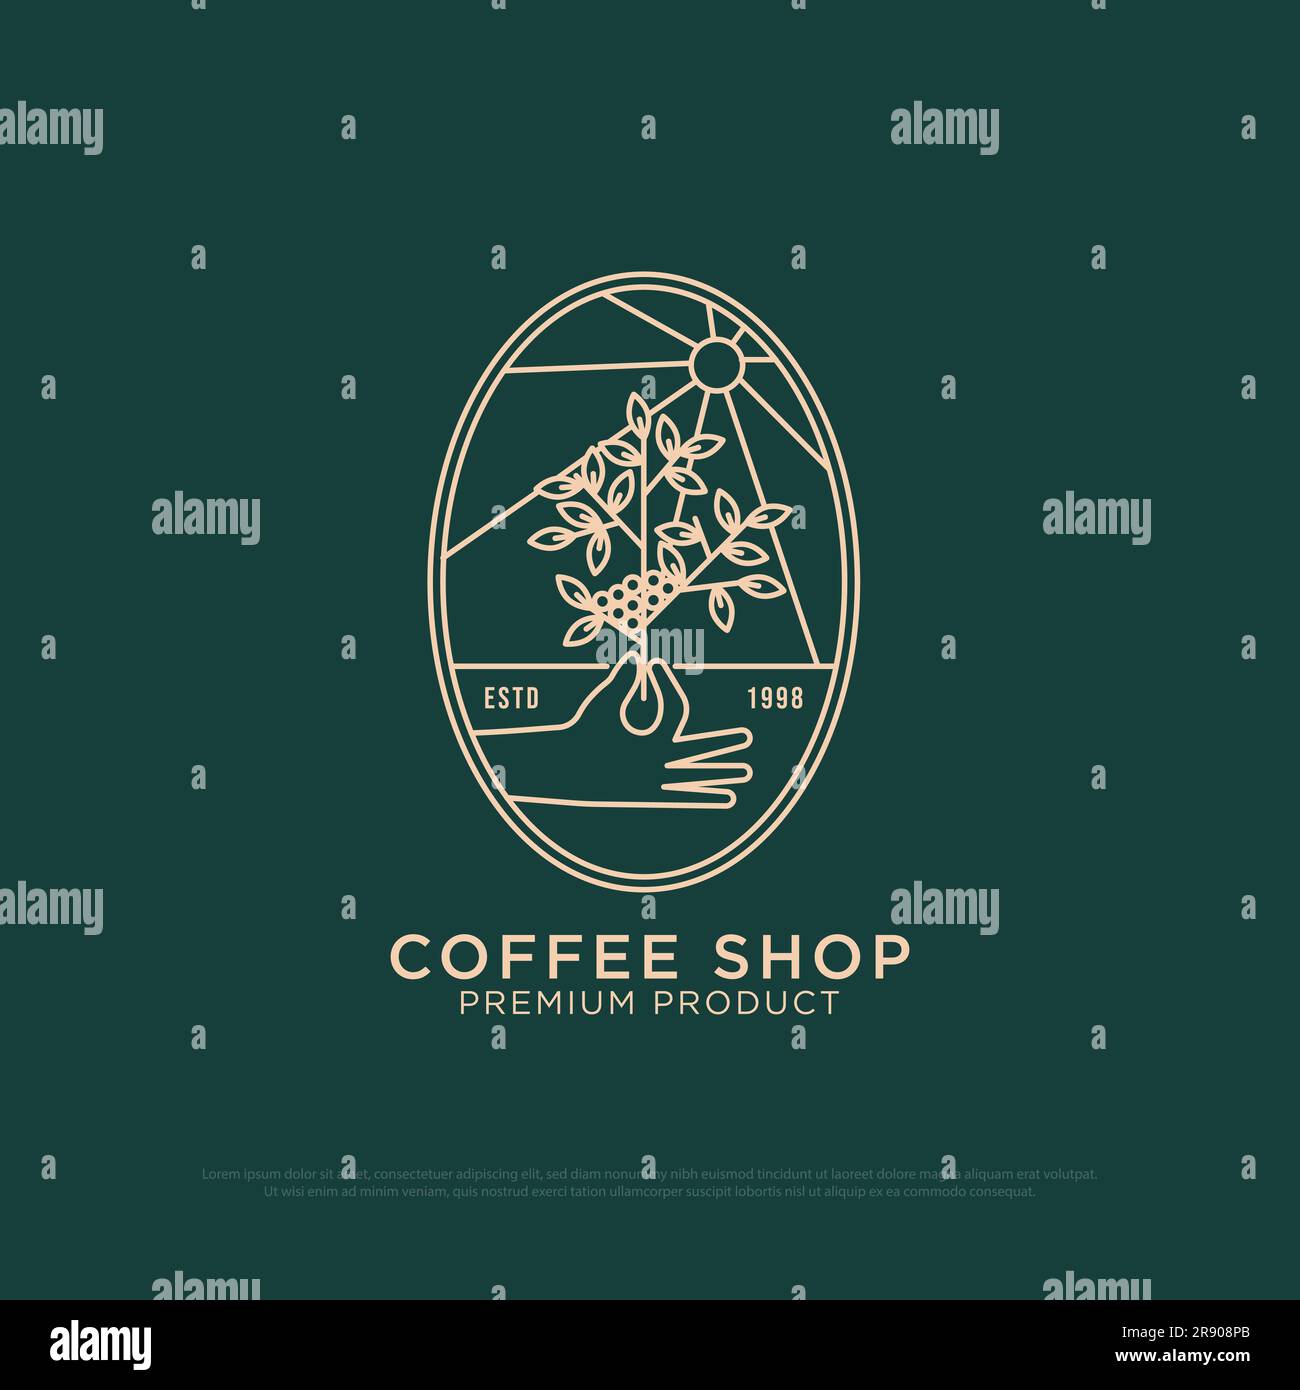 Organic Coffee logo design vector, vintage Outdoor coffee logo illustration with outline style, best for restaurant, cafe, beverages logo brand Stock Vector